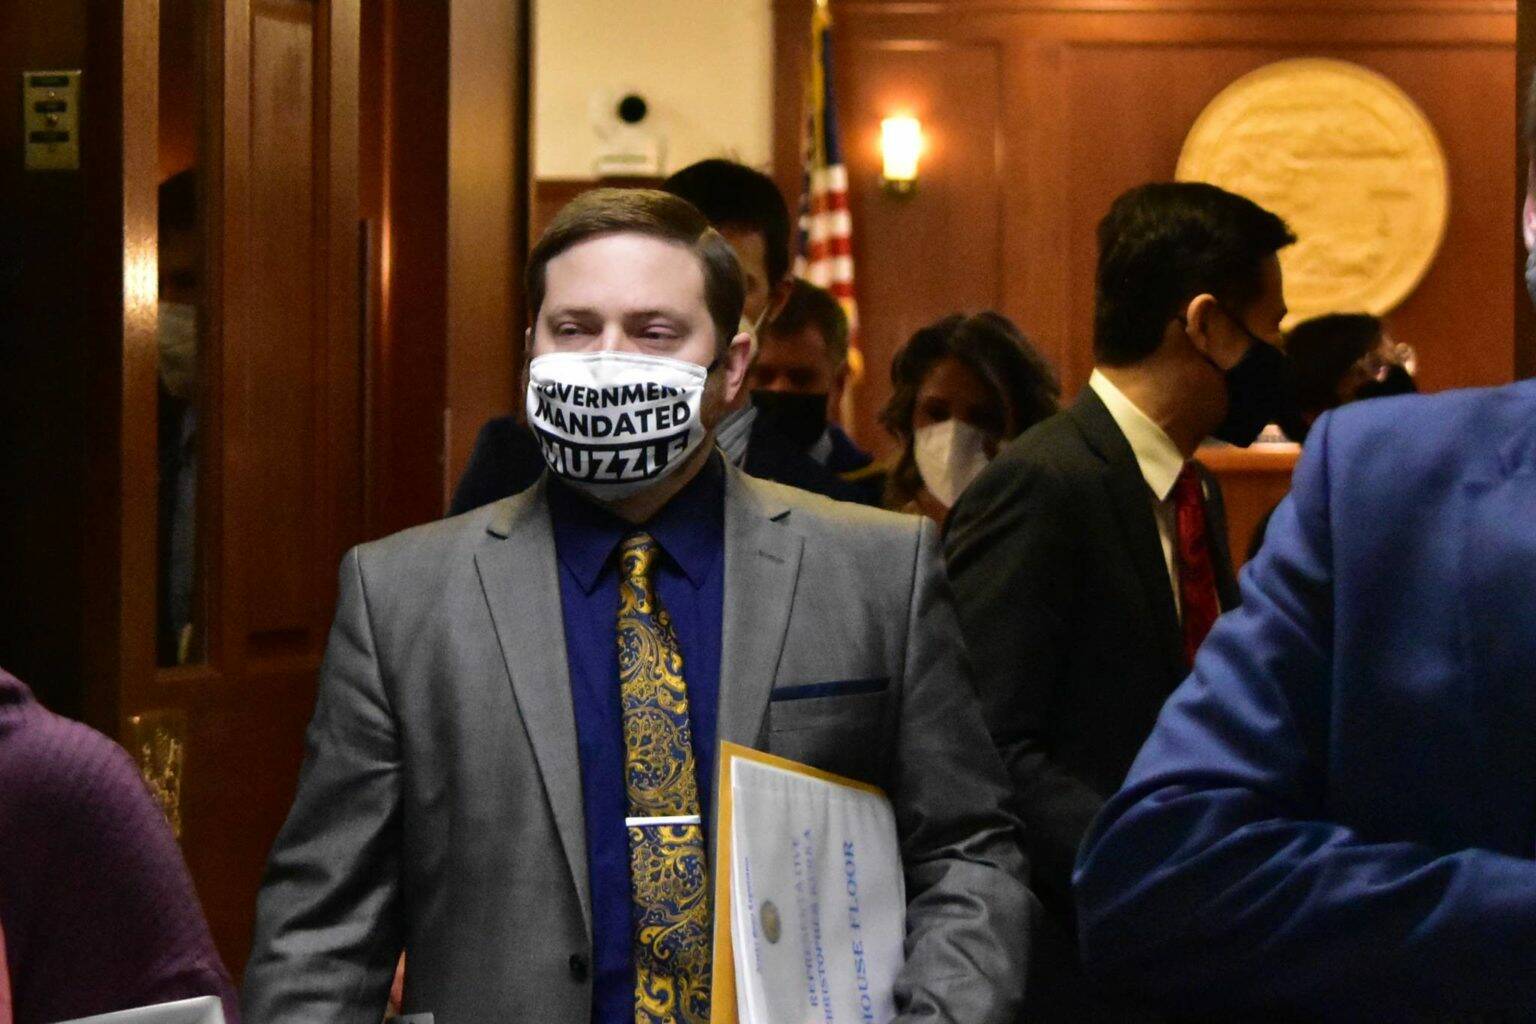 Rep. Chris Kurka, R-Wasilla, leaves the chambers of the Alaska House of Representatives on Friday, March 19, 2021, after an hour of delays concerning the wording on his mask. On Monday, Kurka announced he was running for governor in 2022. (Peter Segall / Juneau Empire)